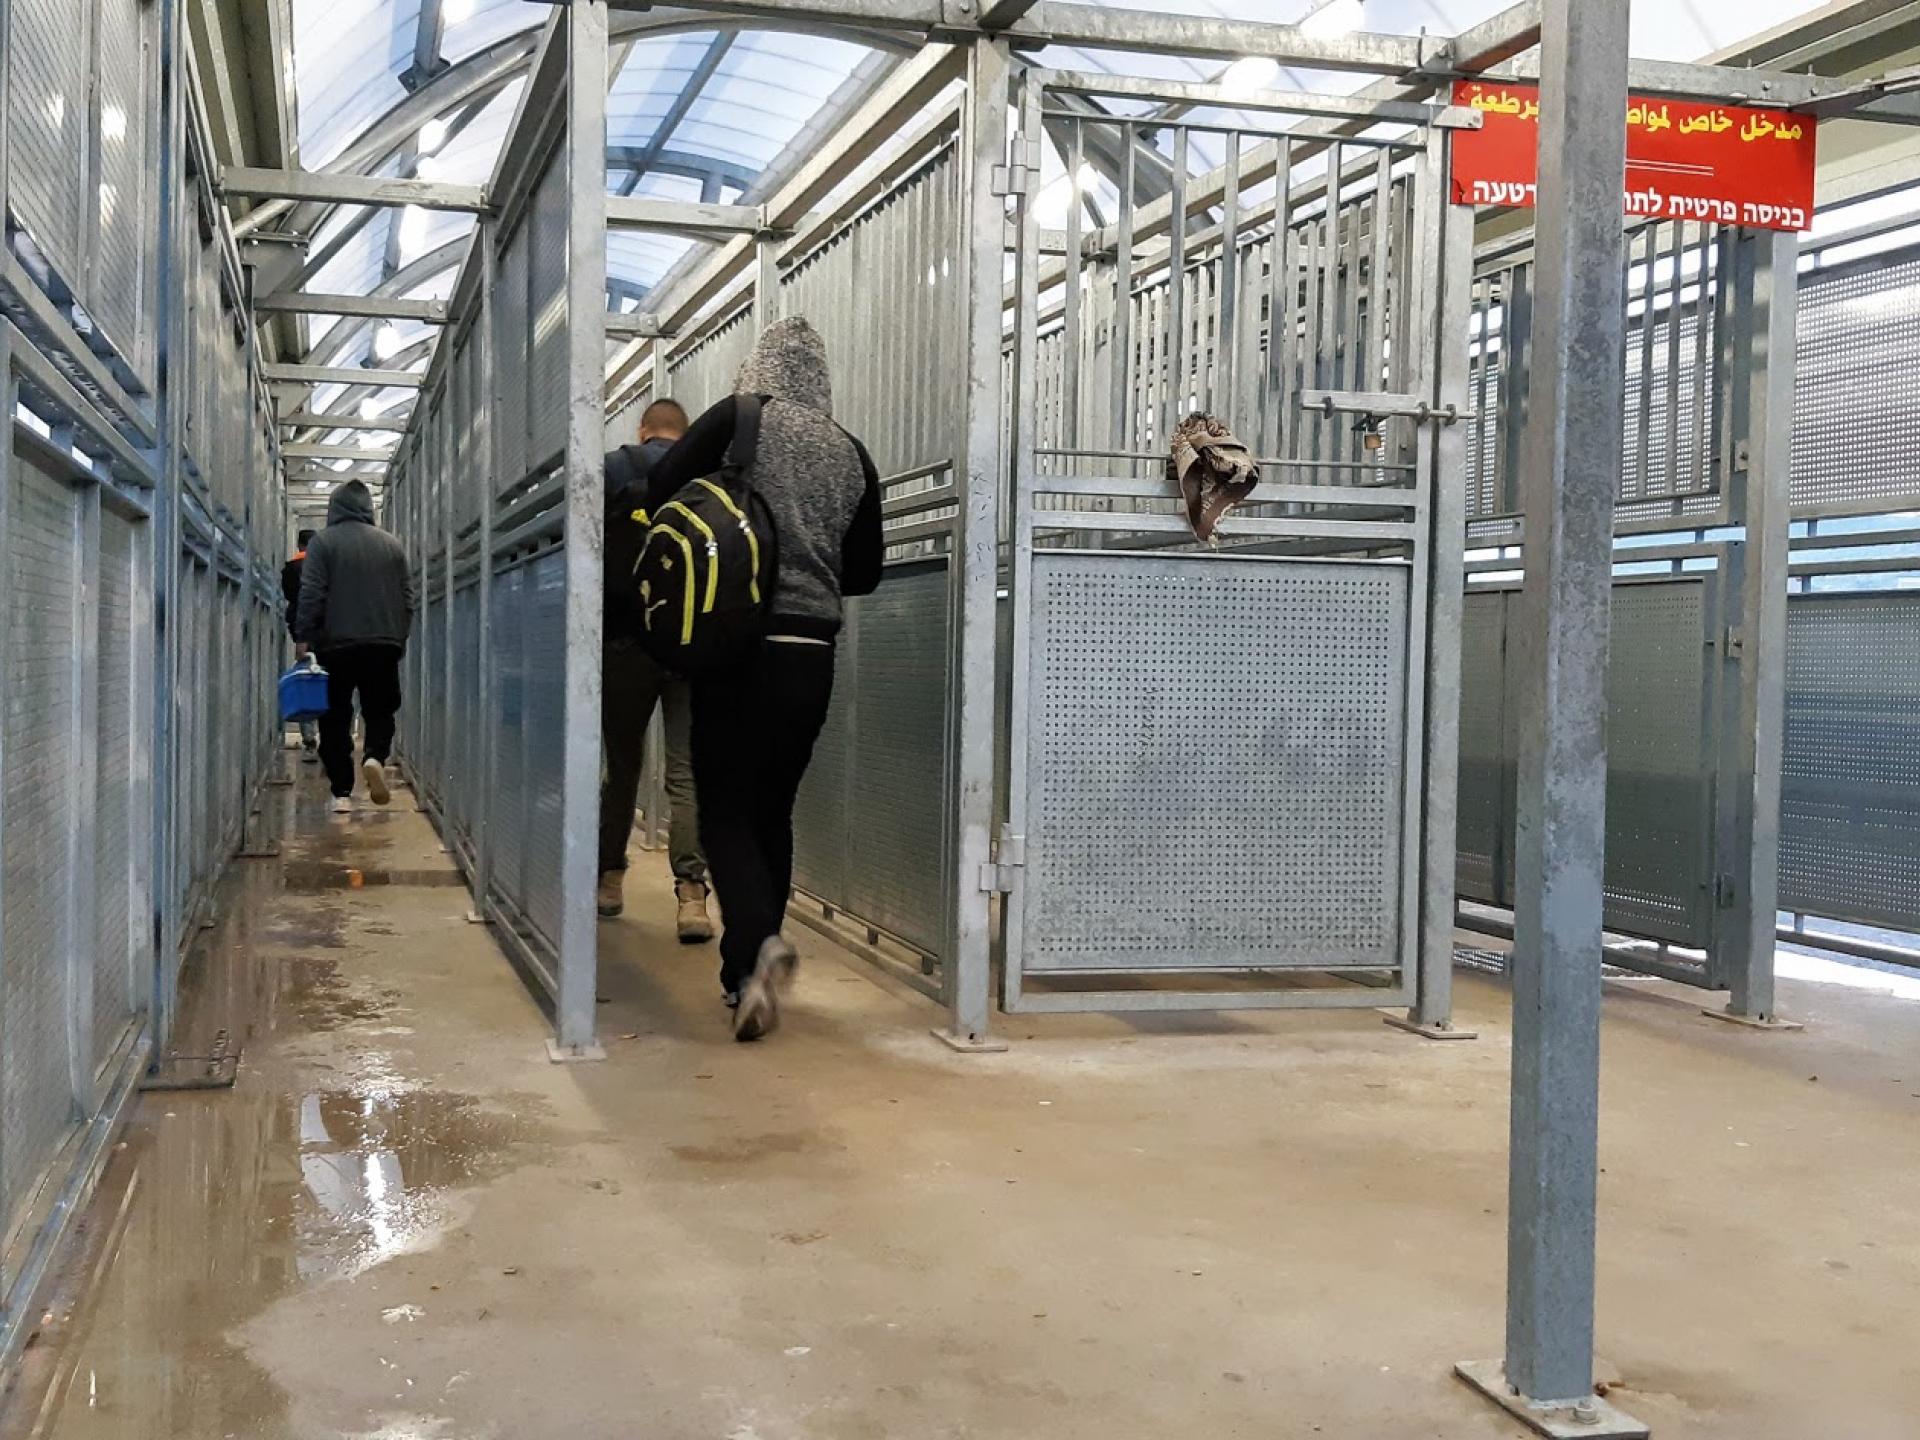 Barta’a Checkpoint: The shiny new cage does not stop the rain from falling in